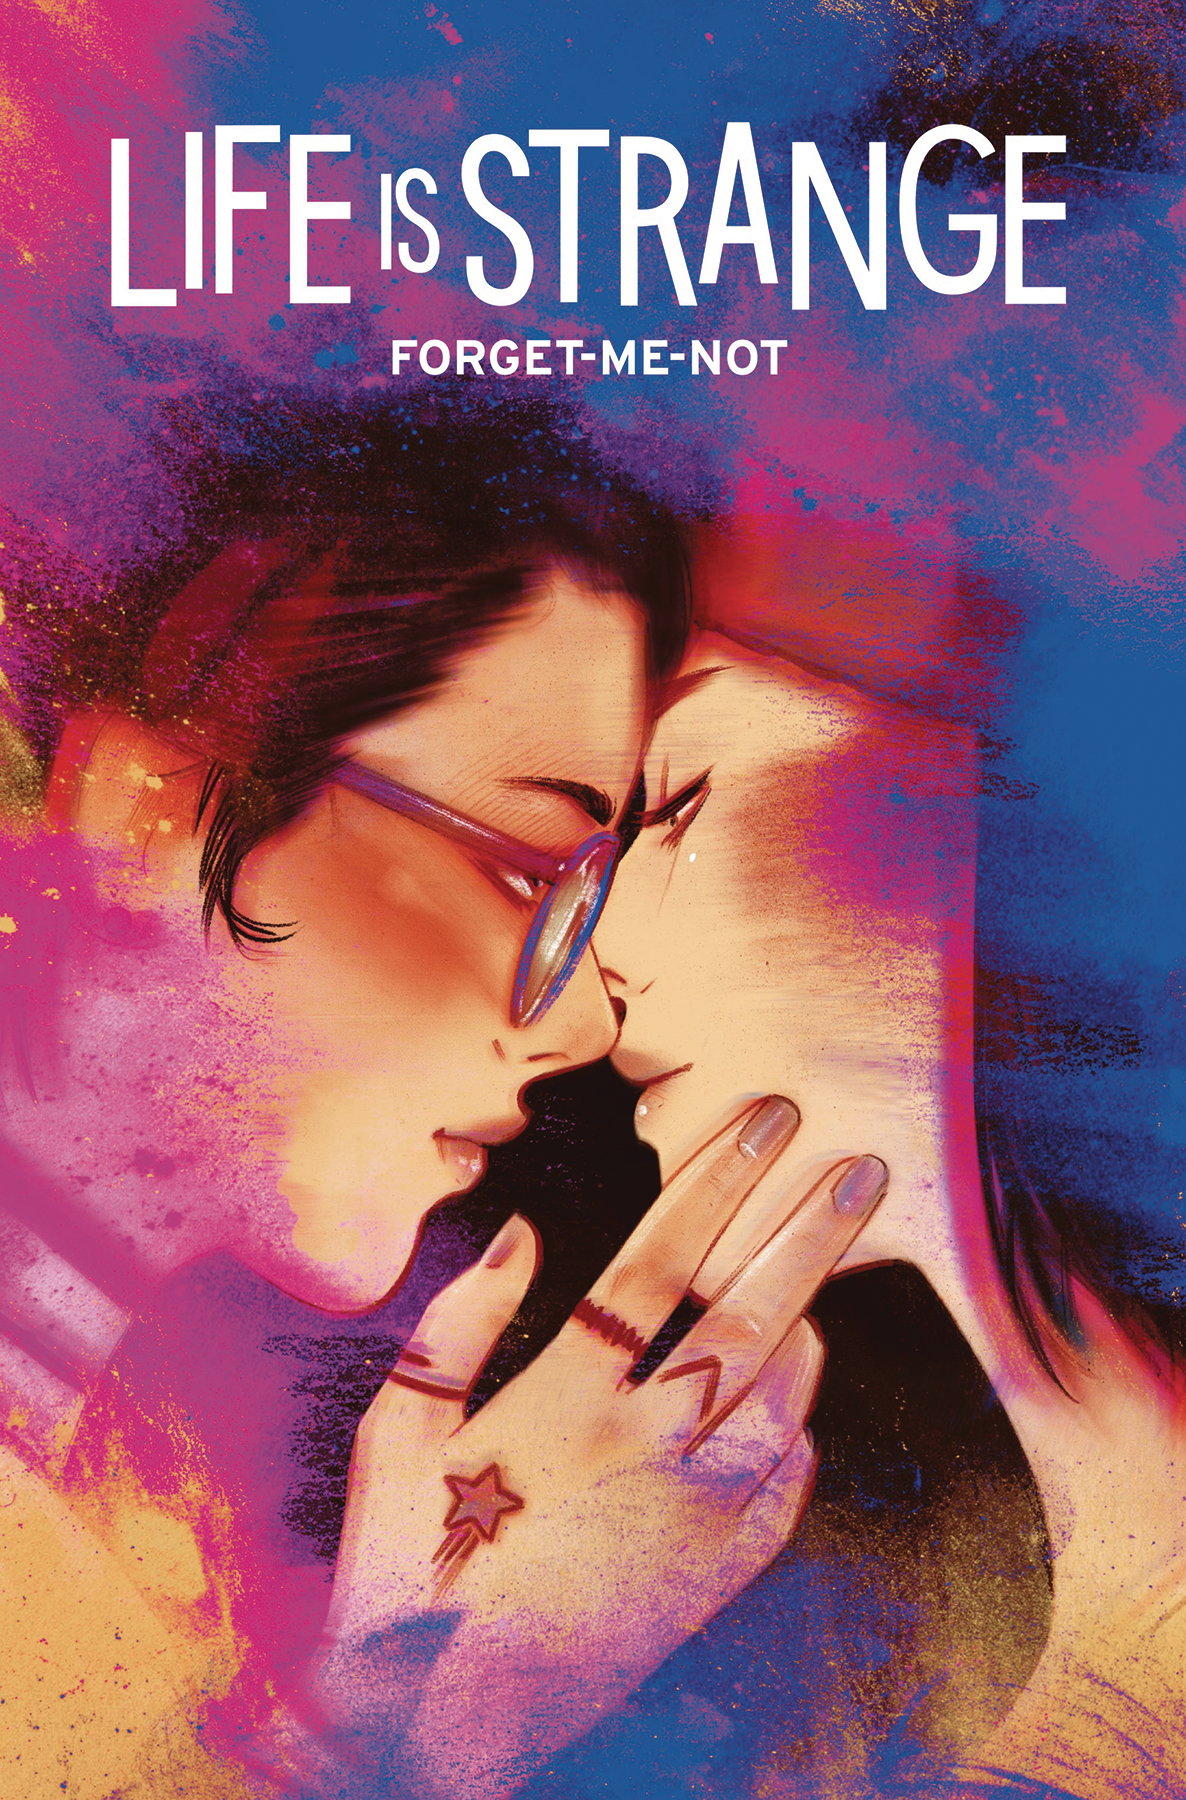 Life Is Strange Forget Me Not #1 Cover A Lotay (Mature) (Of 4)